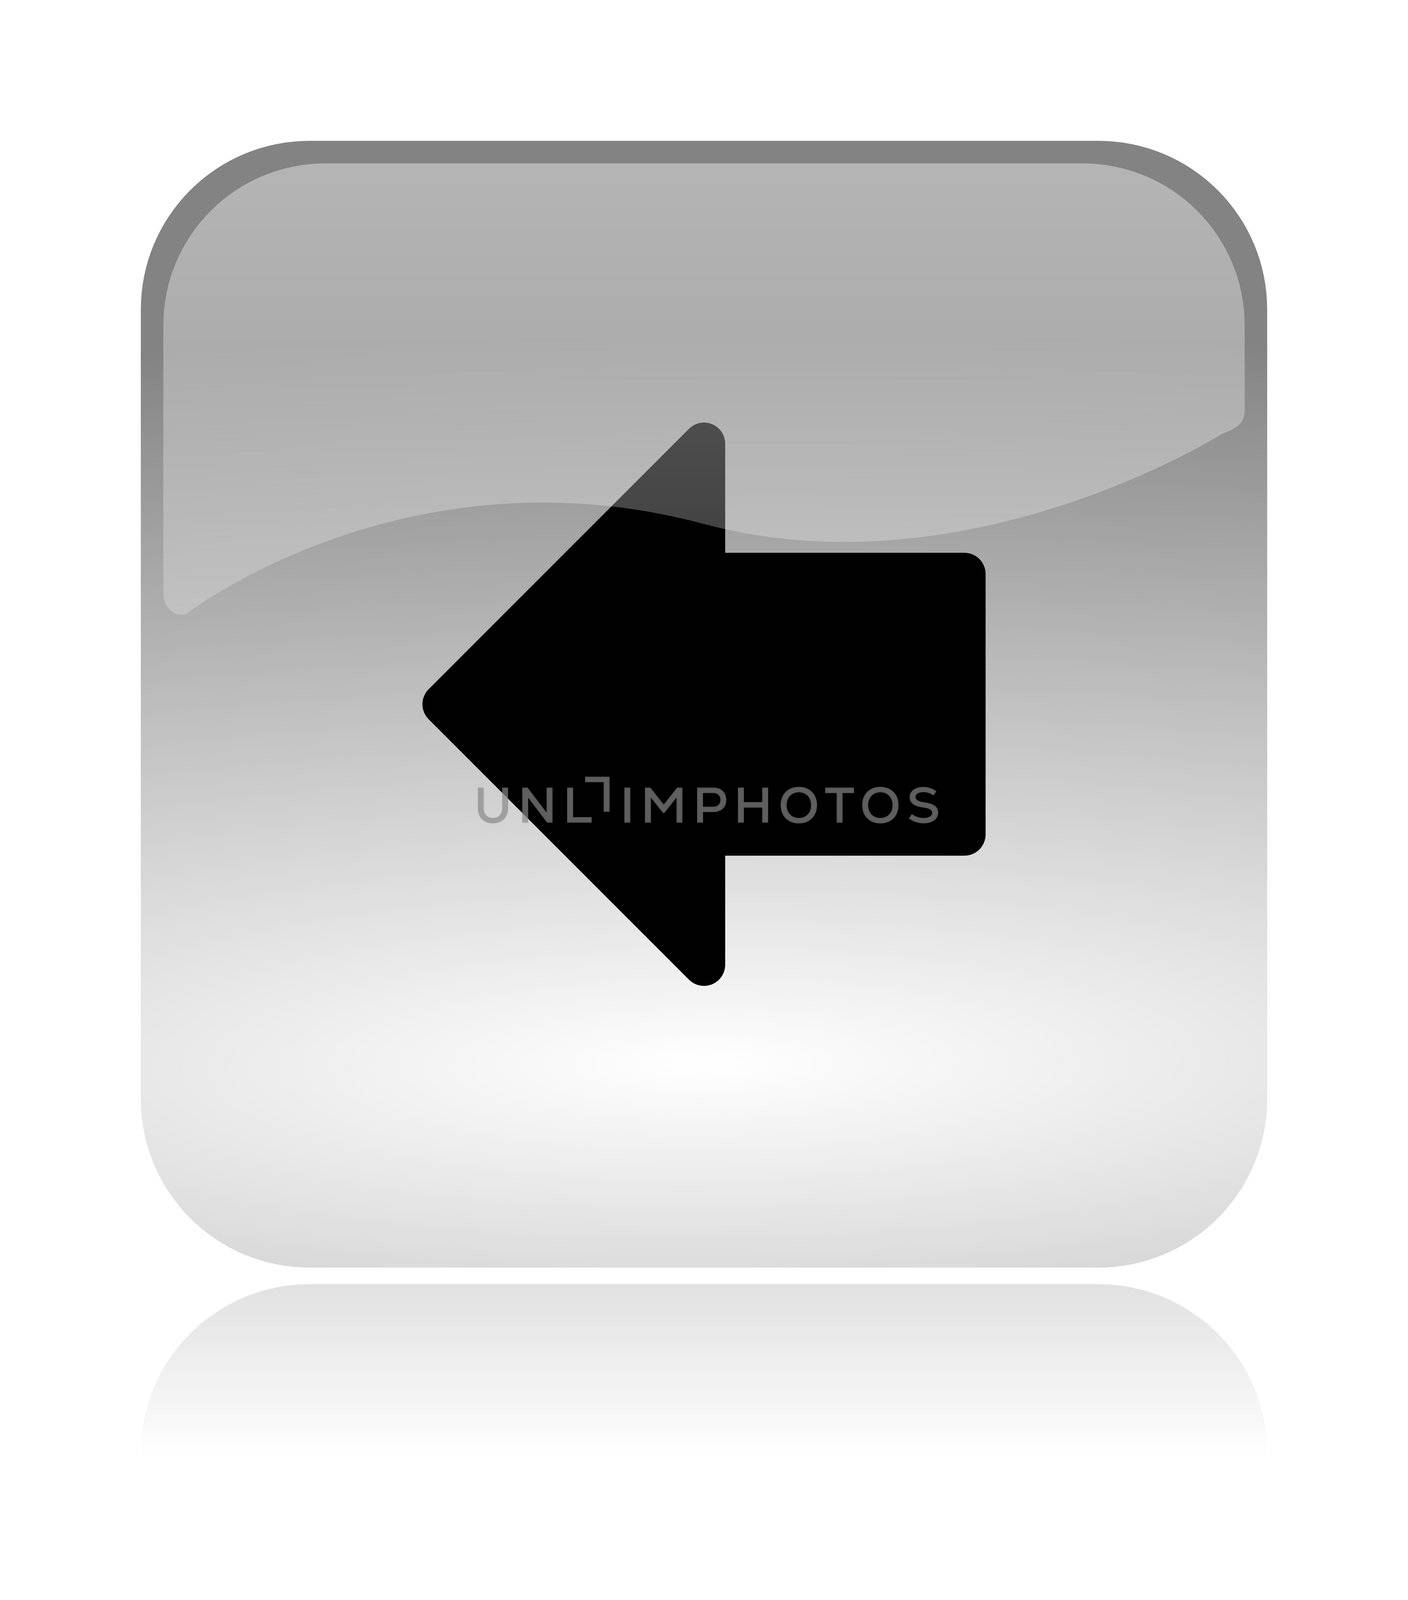 Left arrow previous web interface icon by make